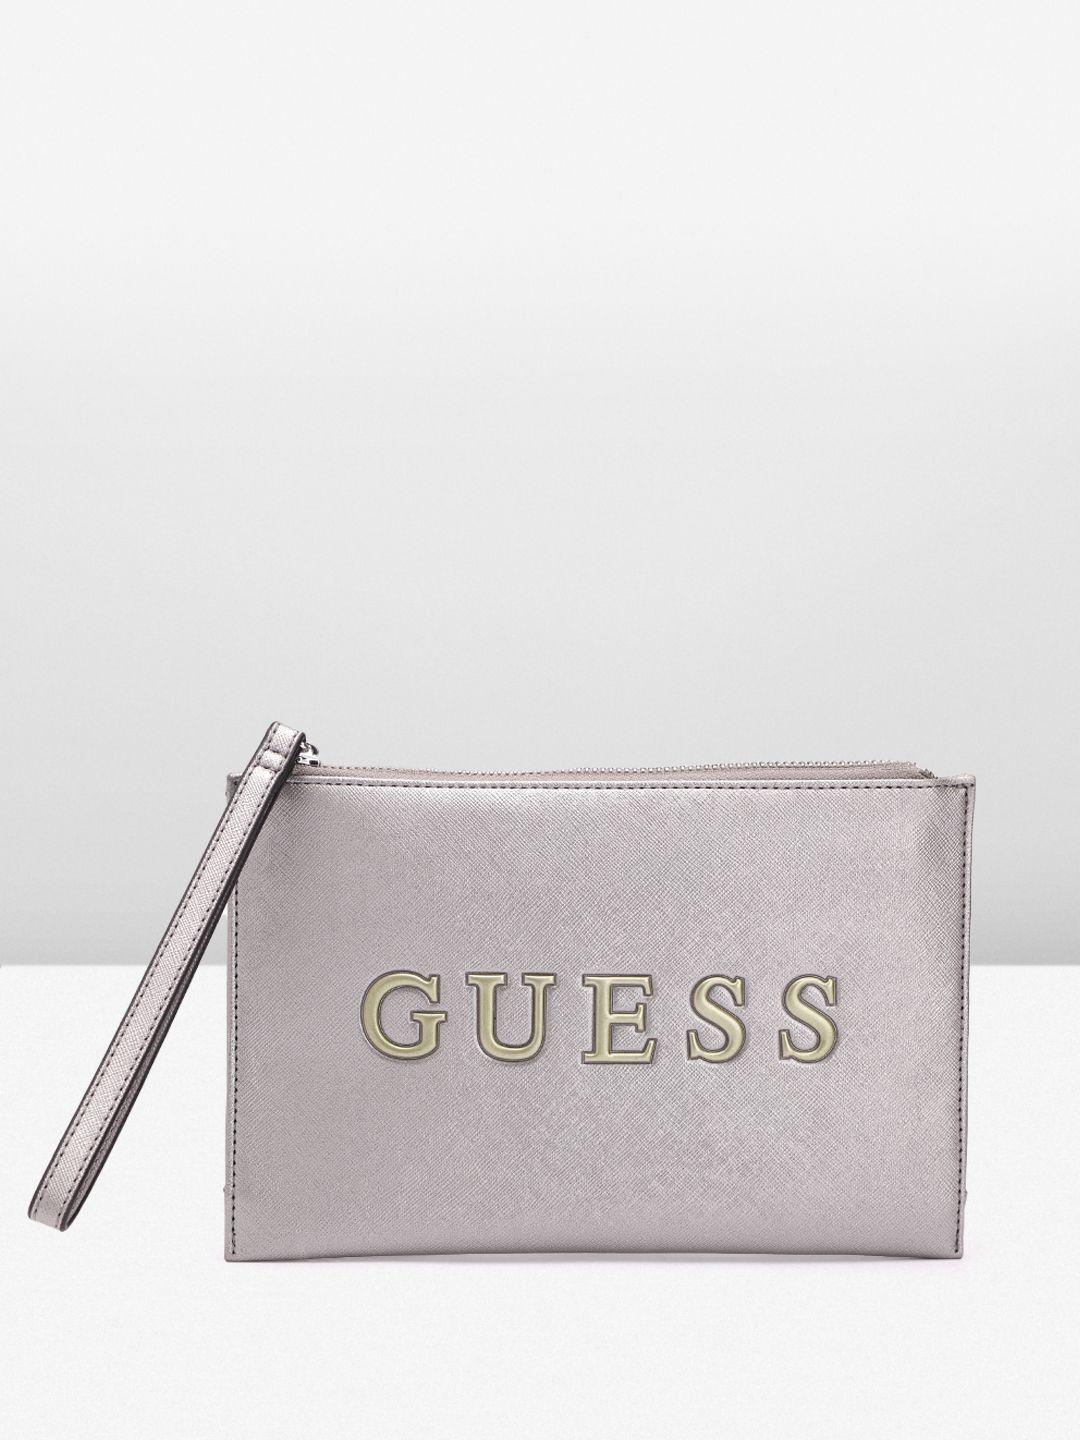 guess brand logo textured purse with wrist loop